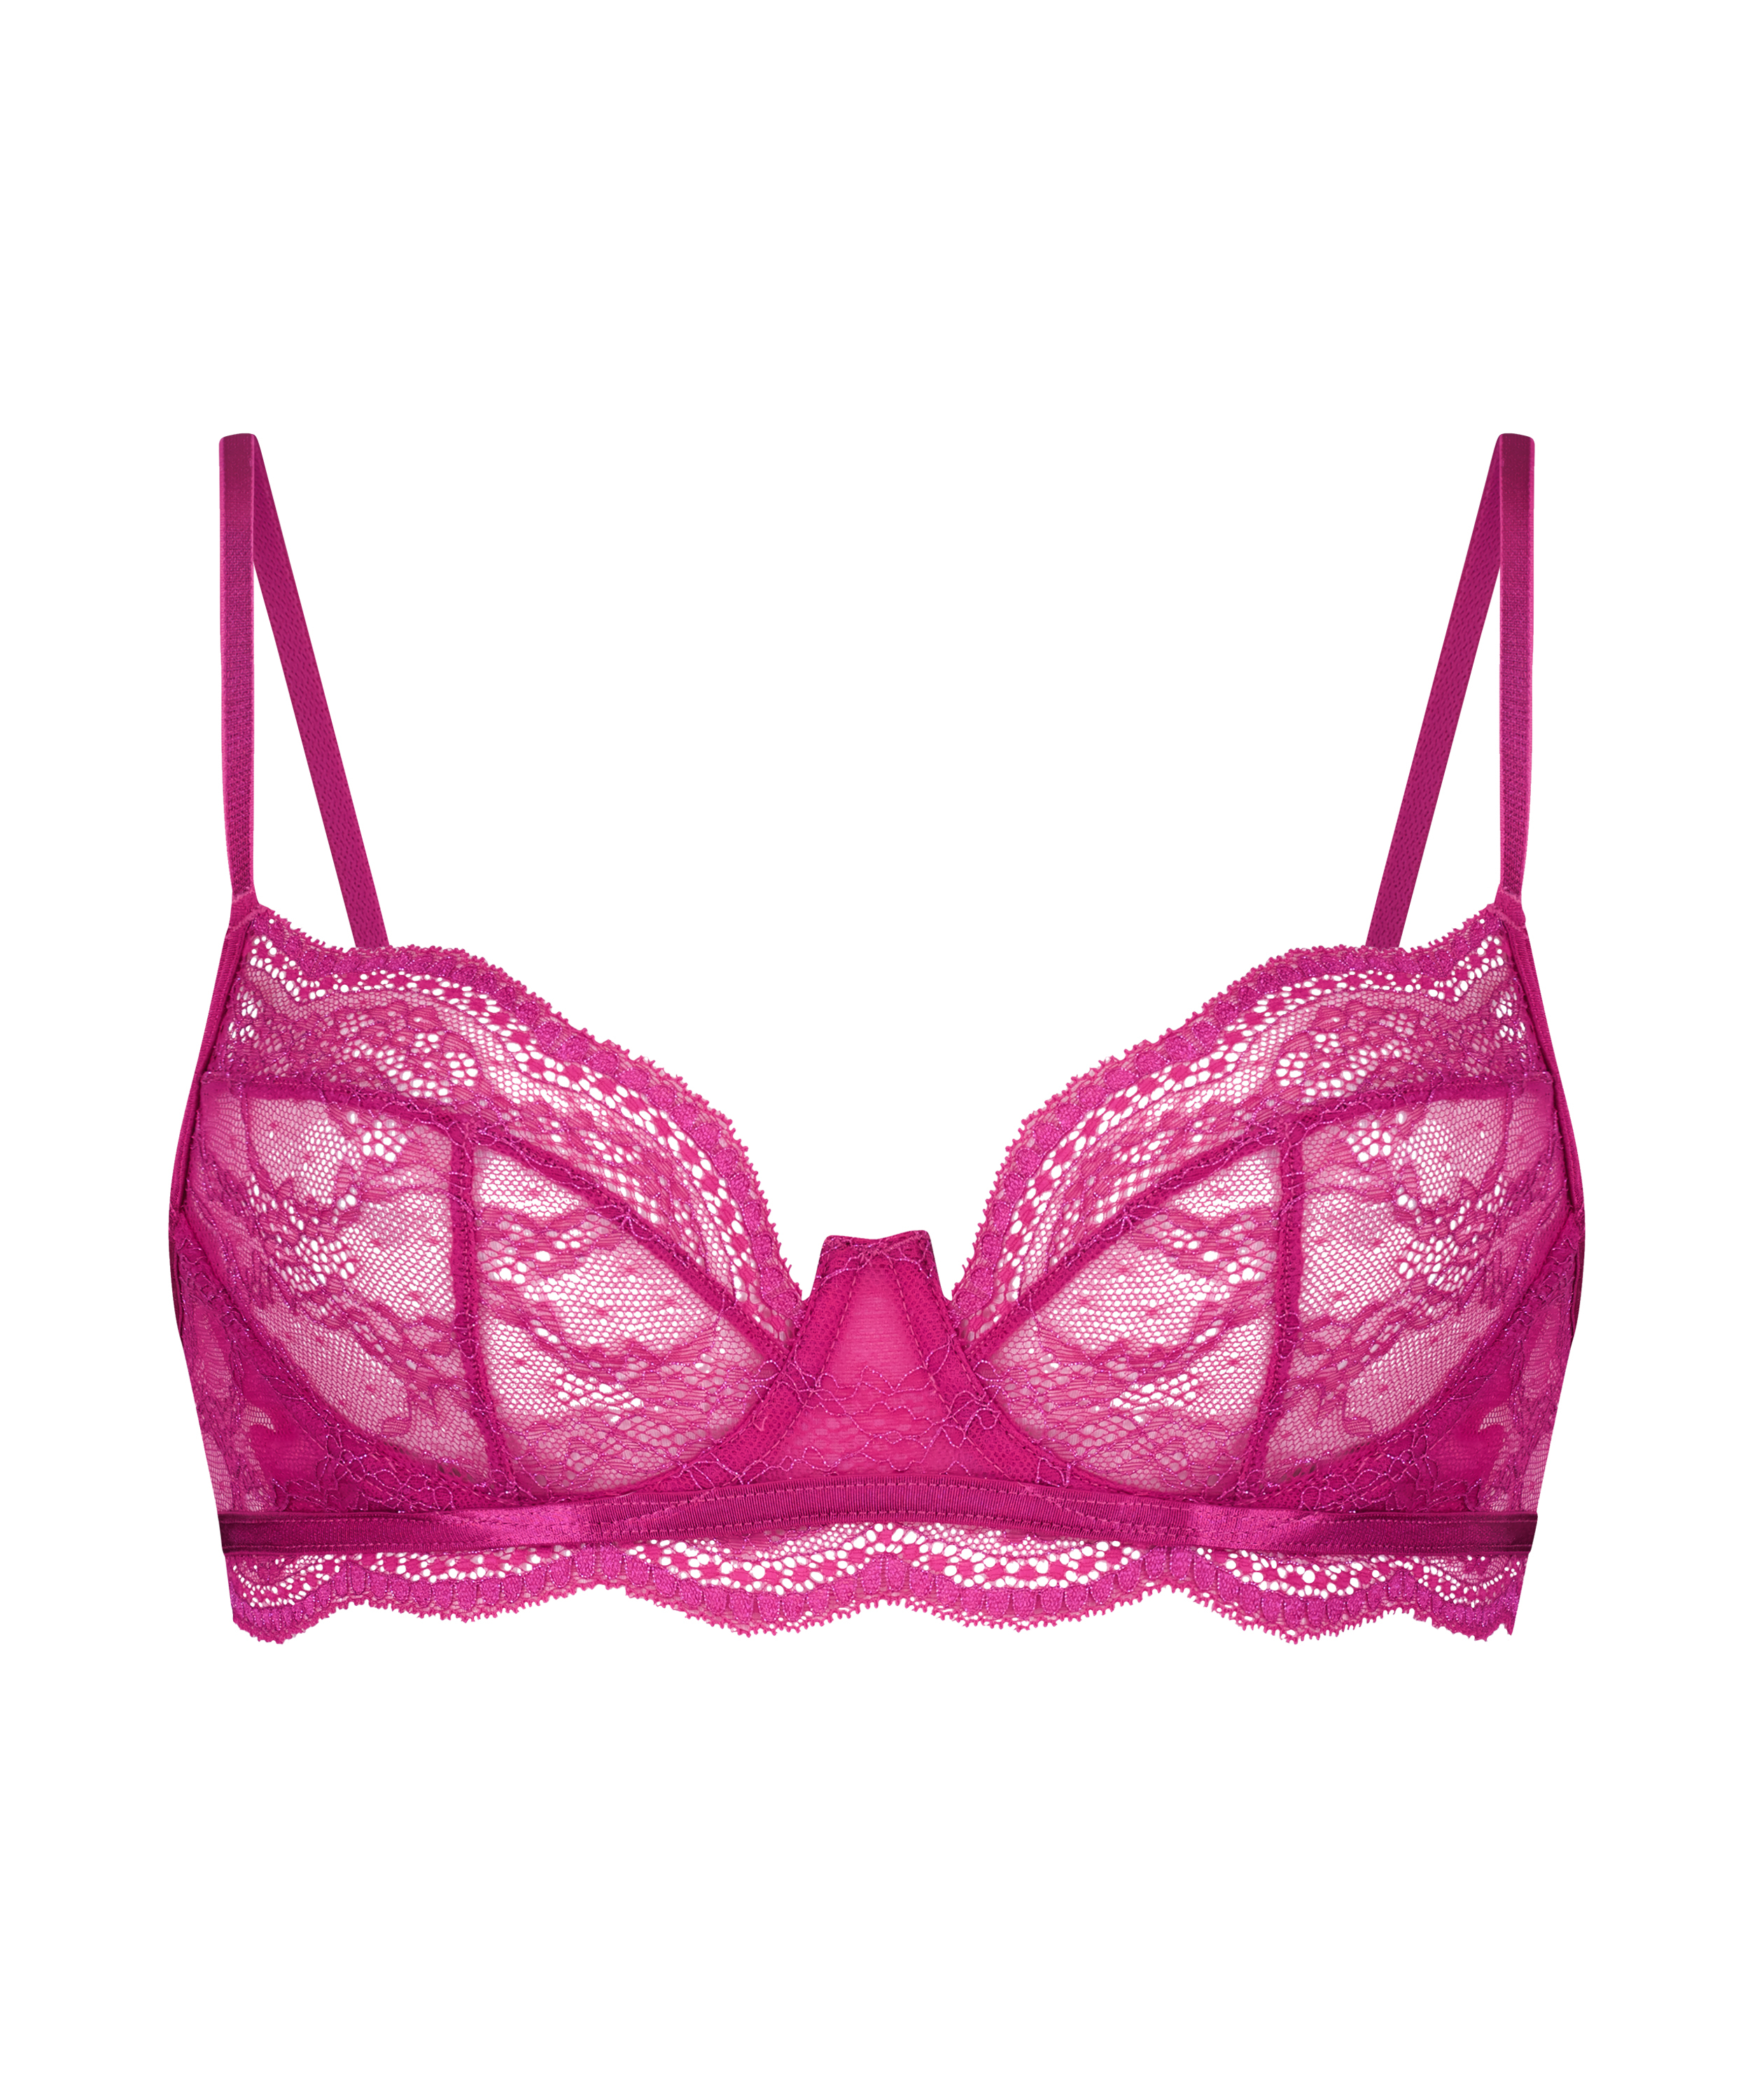 Isabelle Sparkle Non-Padded Underwired Bra for €34.99 - Lace Bras